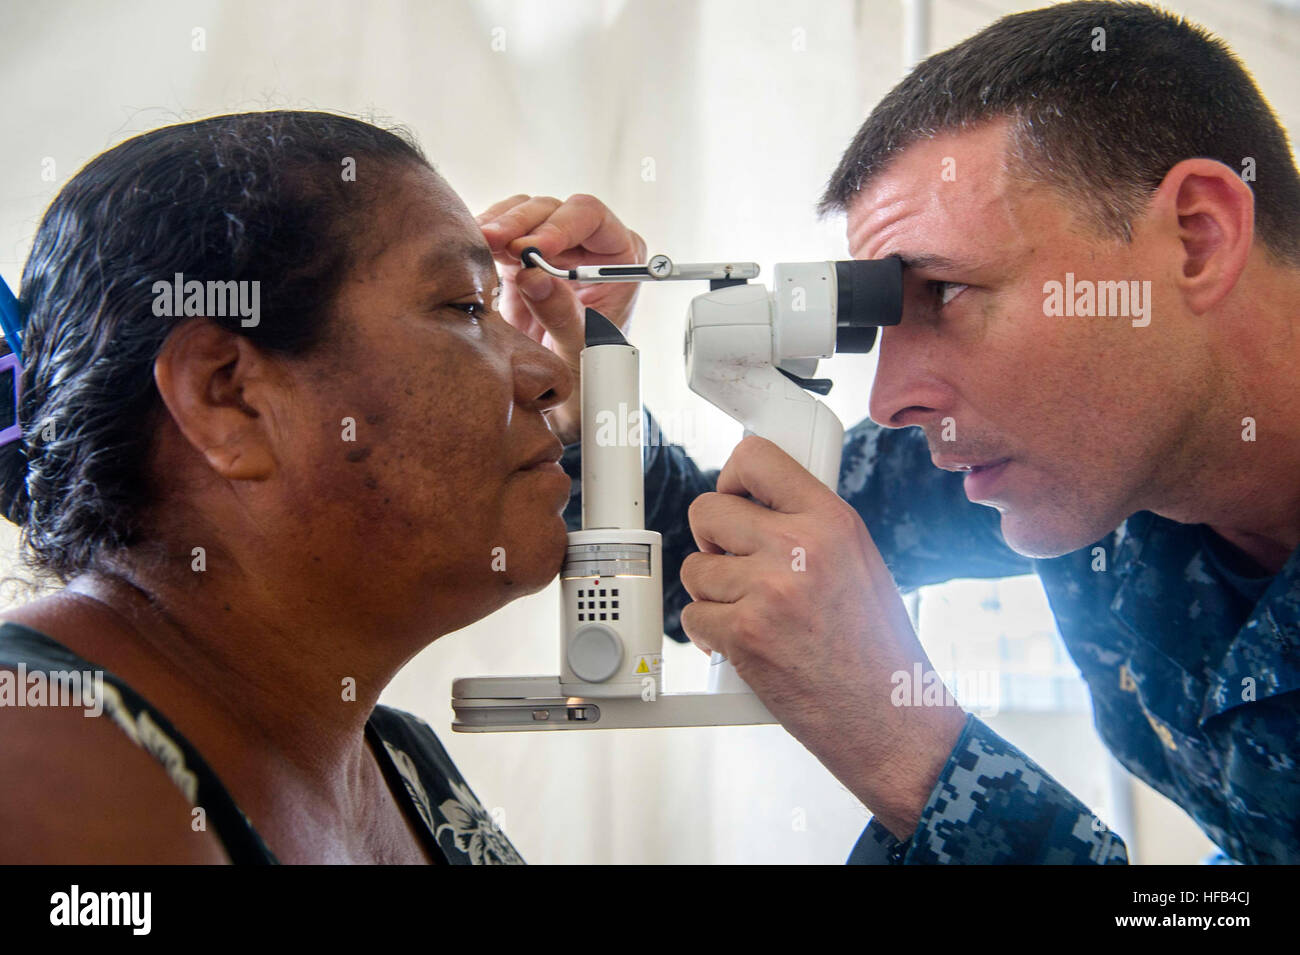 150521-N-XQ474-109 PUERTO CABEZAS, Nicaragua (May 21, 2015) Cmdr. Eric Barnes, a native of Virginia Beach, Va., and optometrist assigned to Naval Station Norfolk Branch Health Clinic, Va., performs an eye exam on a patient at a medical site established at the Instituto Politechnico Heroes y Martires during Continuing Promise 2015. Continuing Promise is a U.S. Southern Command-sponsored and U.S. Naval Forces Southern Command/U.S. 4th Fleet-conducted deployment to conduct civil-military operations including humanitarian-civil assistance, subject matter expert exchanges, medical, dental, veterina Stock Photo